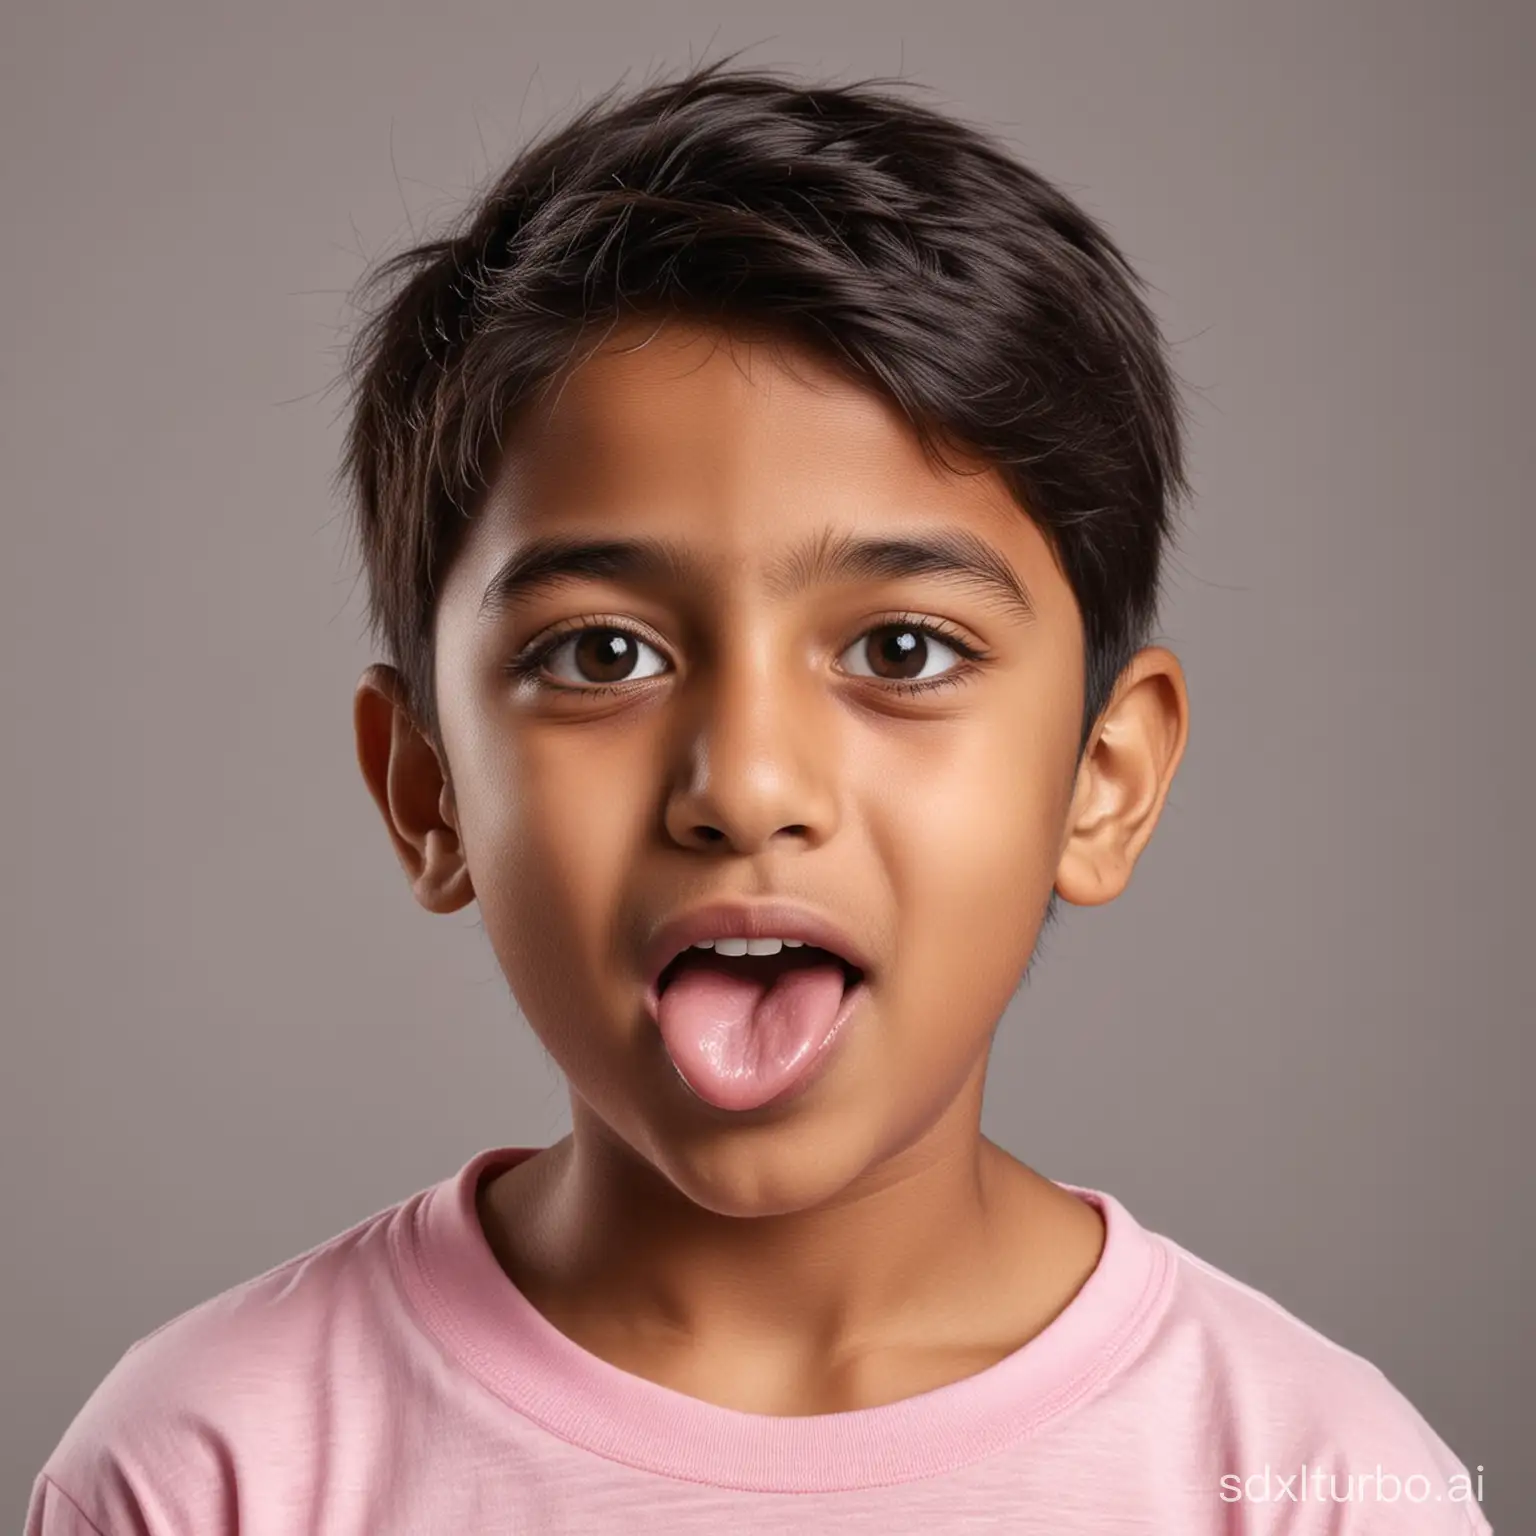 A photo of a young Indian boy kid with her mouth cute selfie expression playfully and cute show different kids with diffrent expression , wearing a light pink t-shirt, with a chocolate on the tip of her nose, close a mouth and try to. moving, grey background, studio portrait, happy expression, childlike innocence, playful poses, shot in the style --ar 9:16